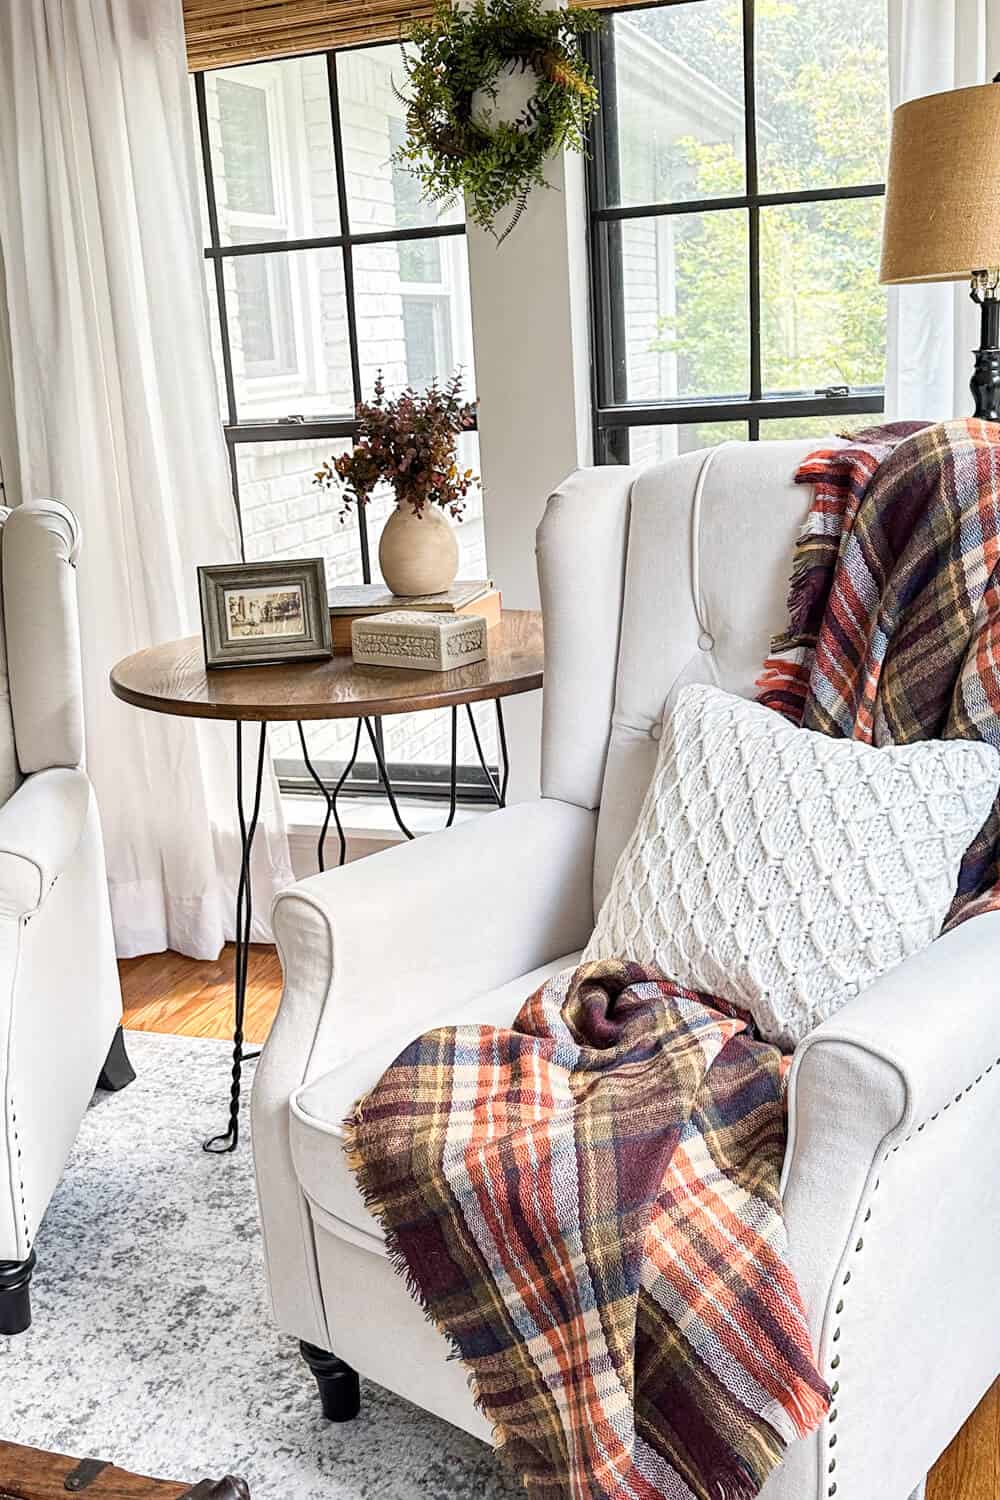 wingback armchair in front of black windows decorated with knit pillowcase and fall plaid throw blanket